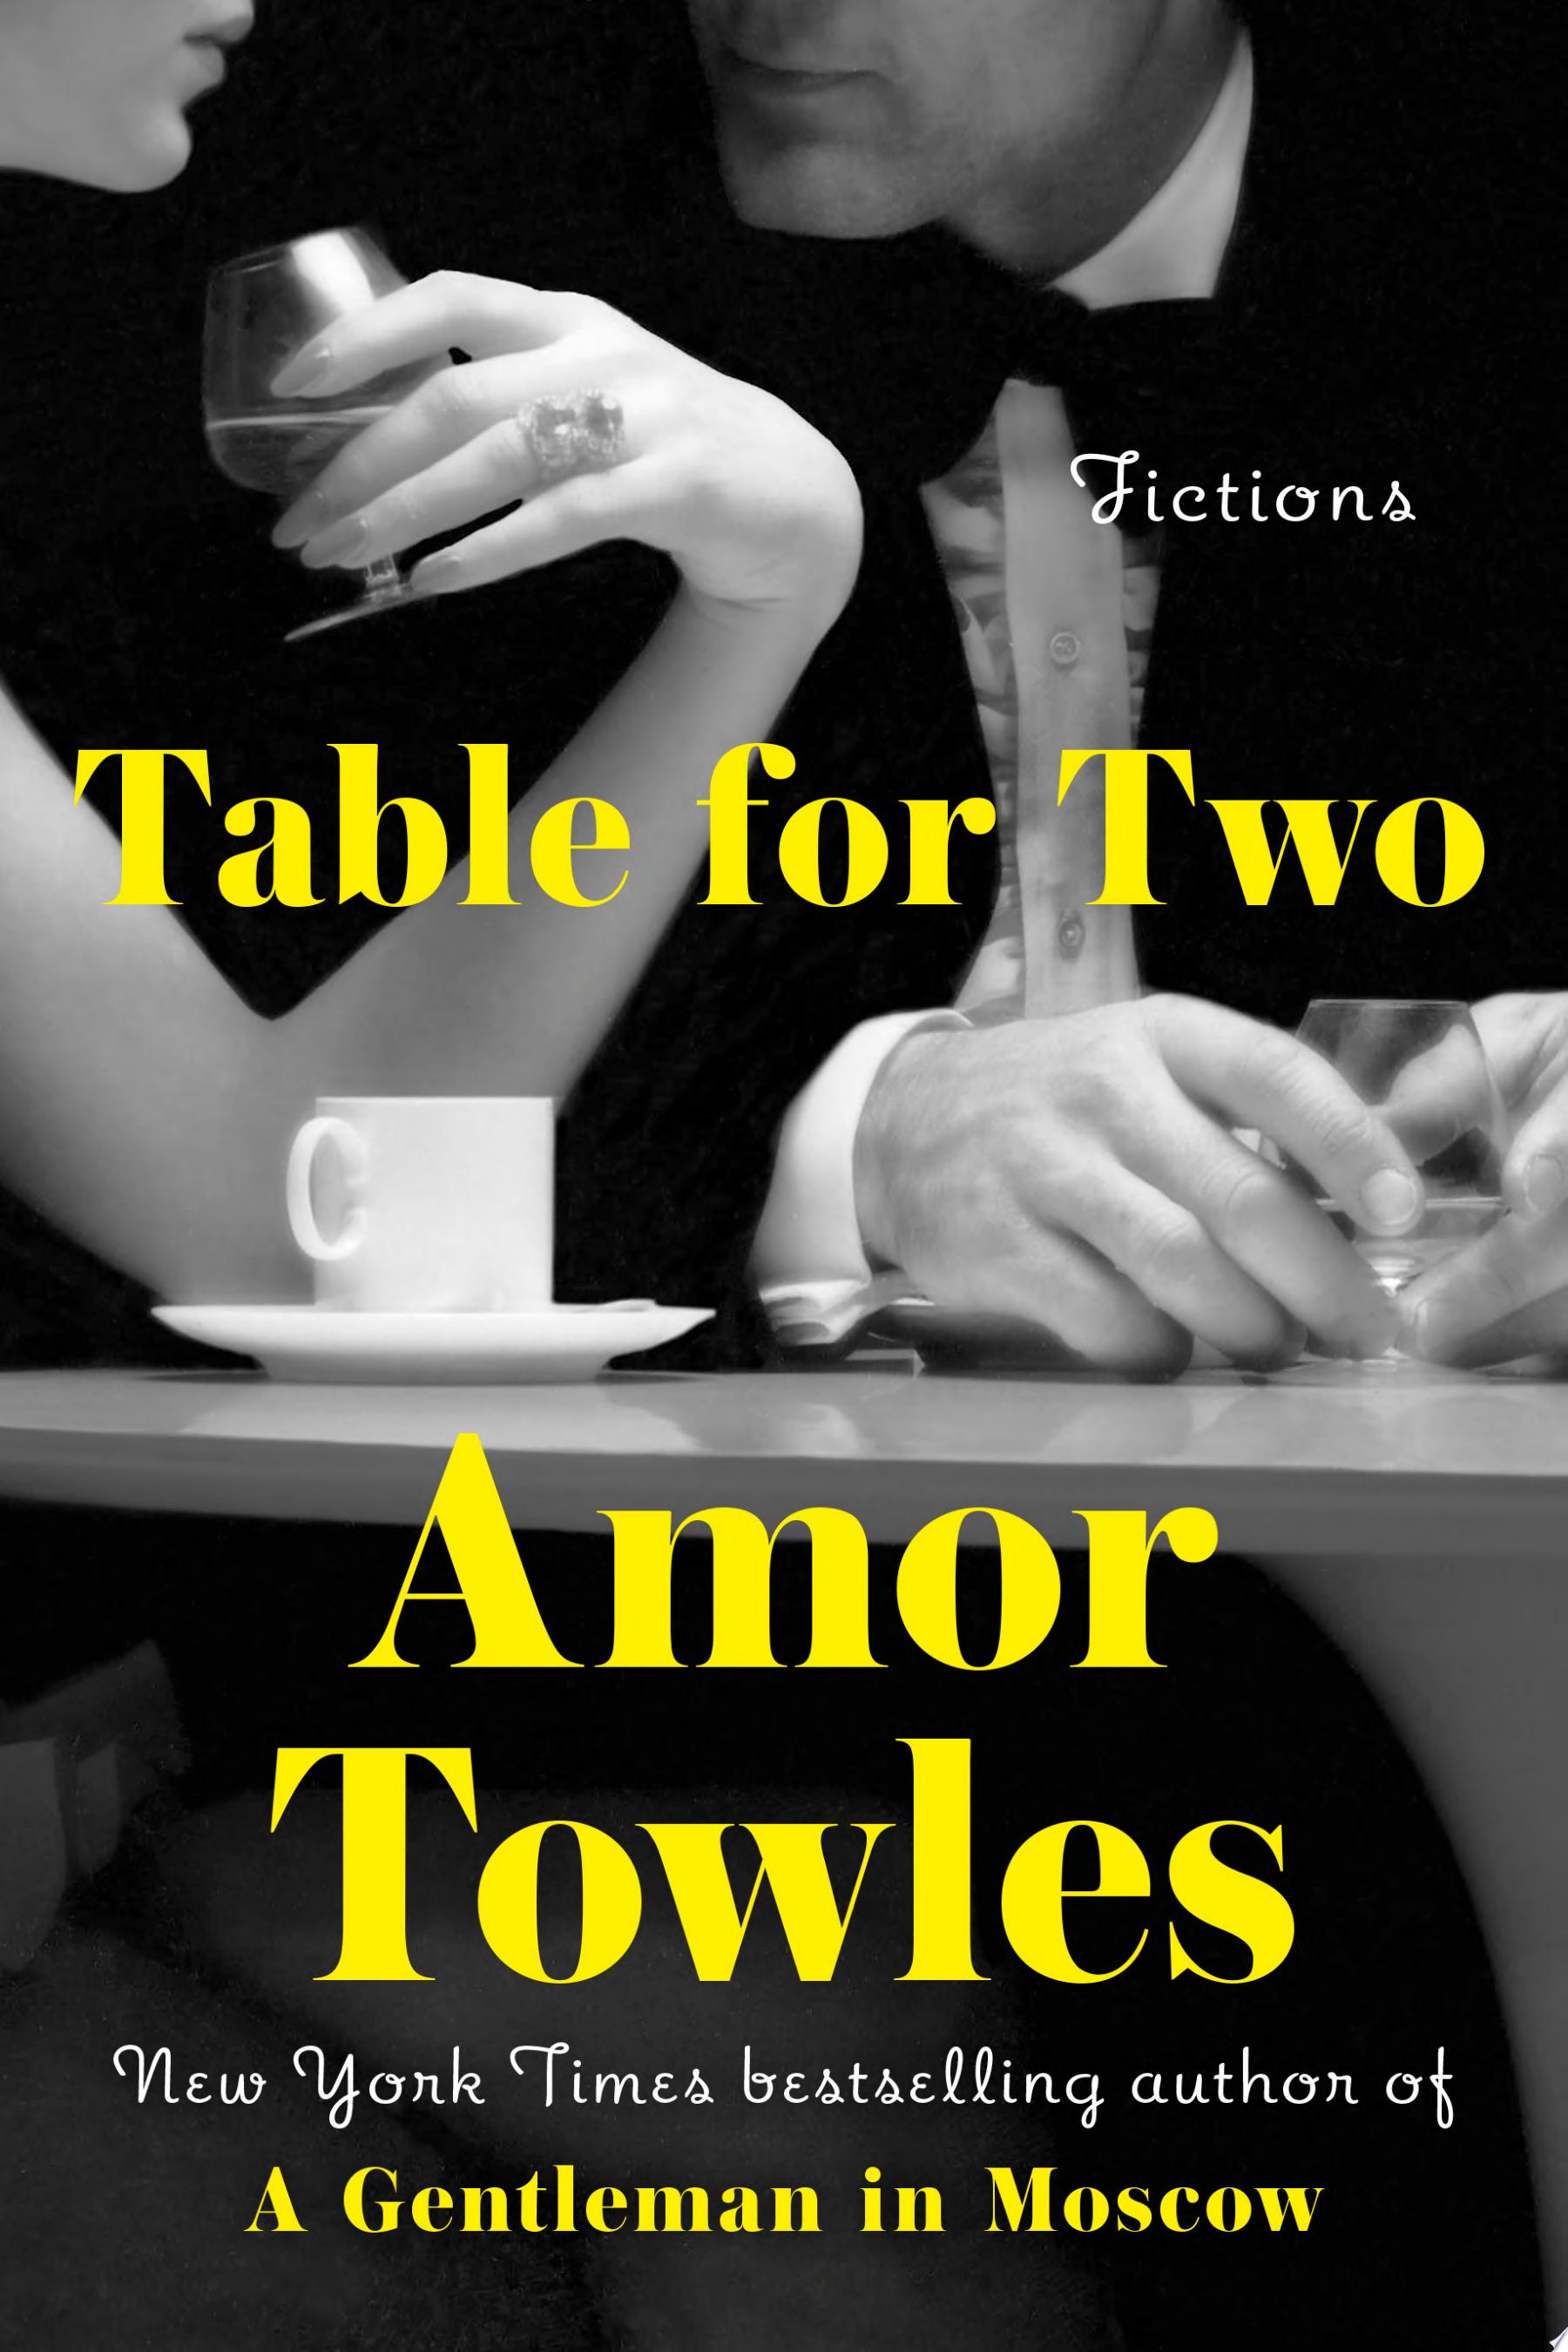 Image for "Table for Two"